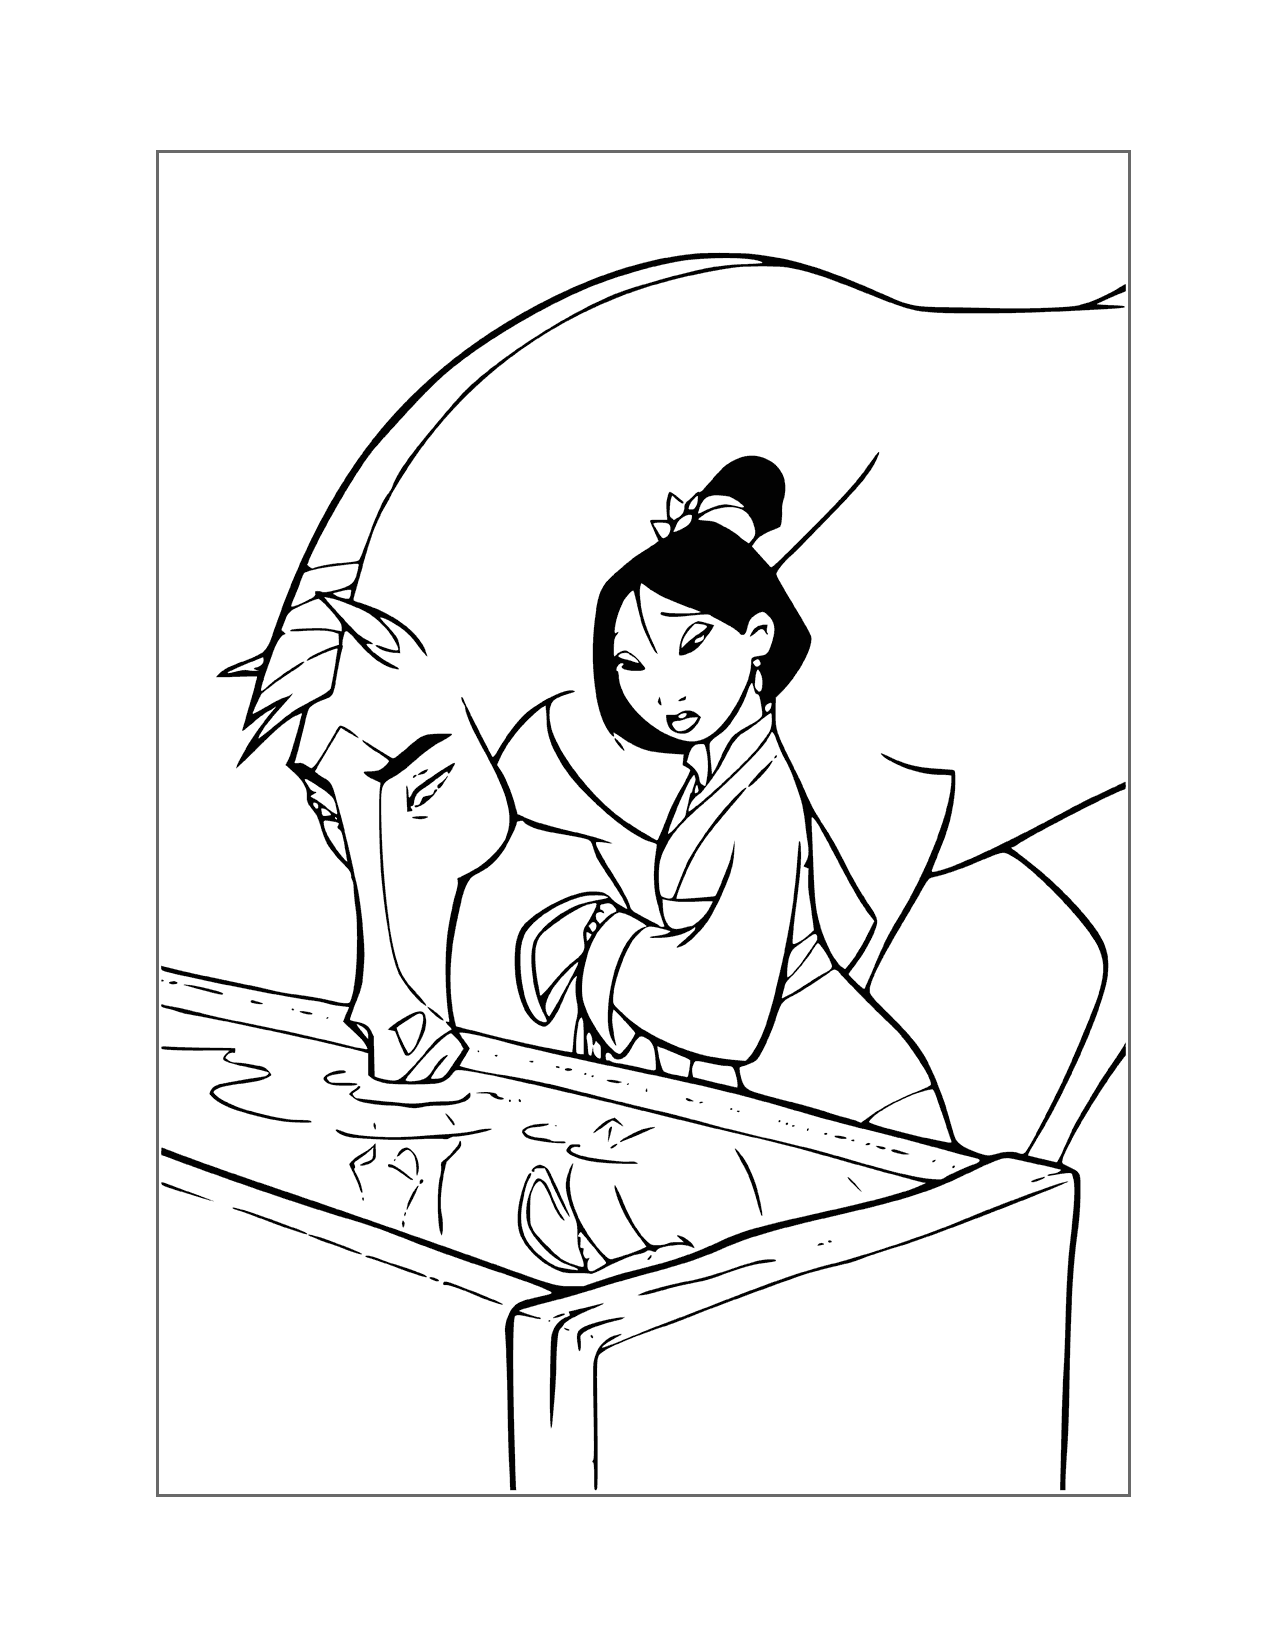 Mulan And Her Horse Khan Coloring Page